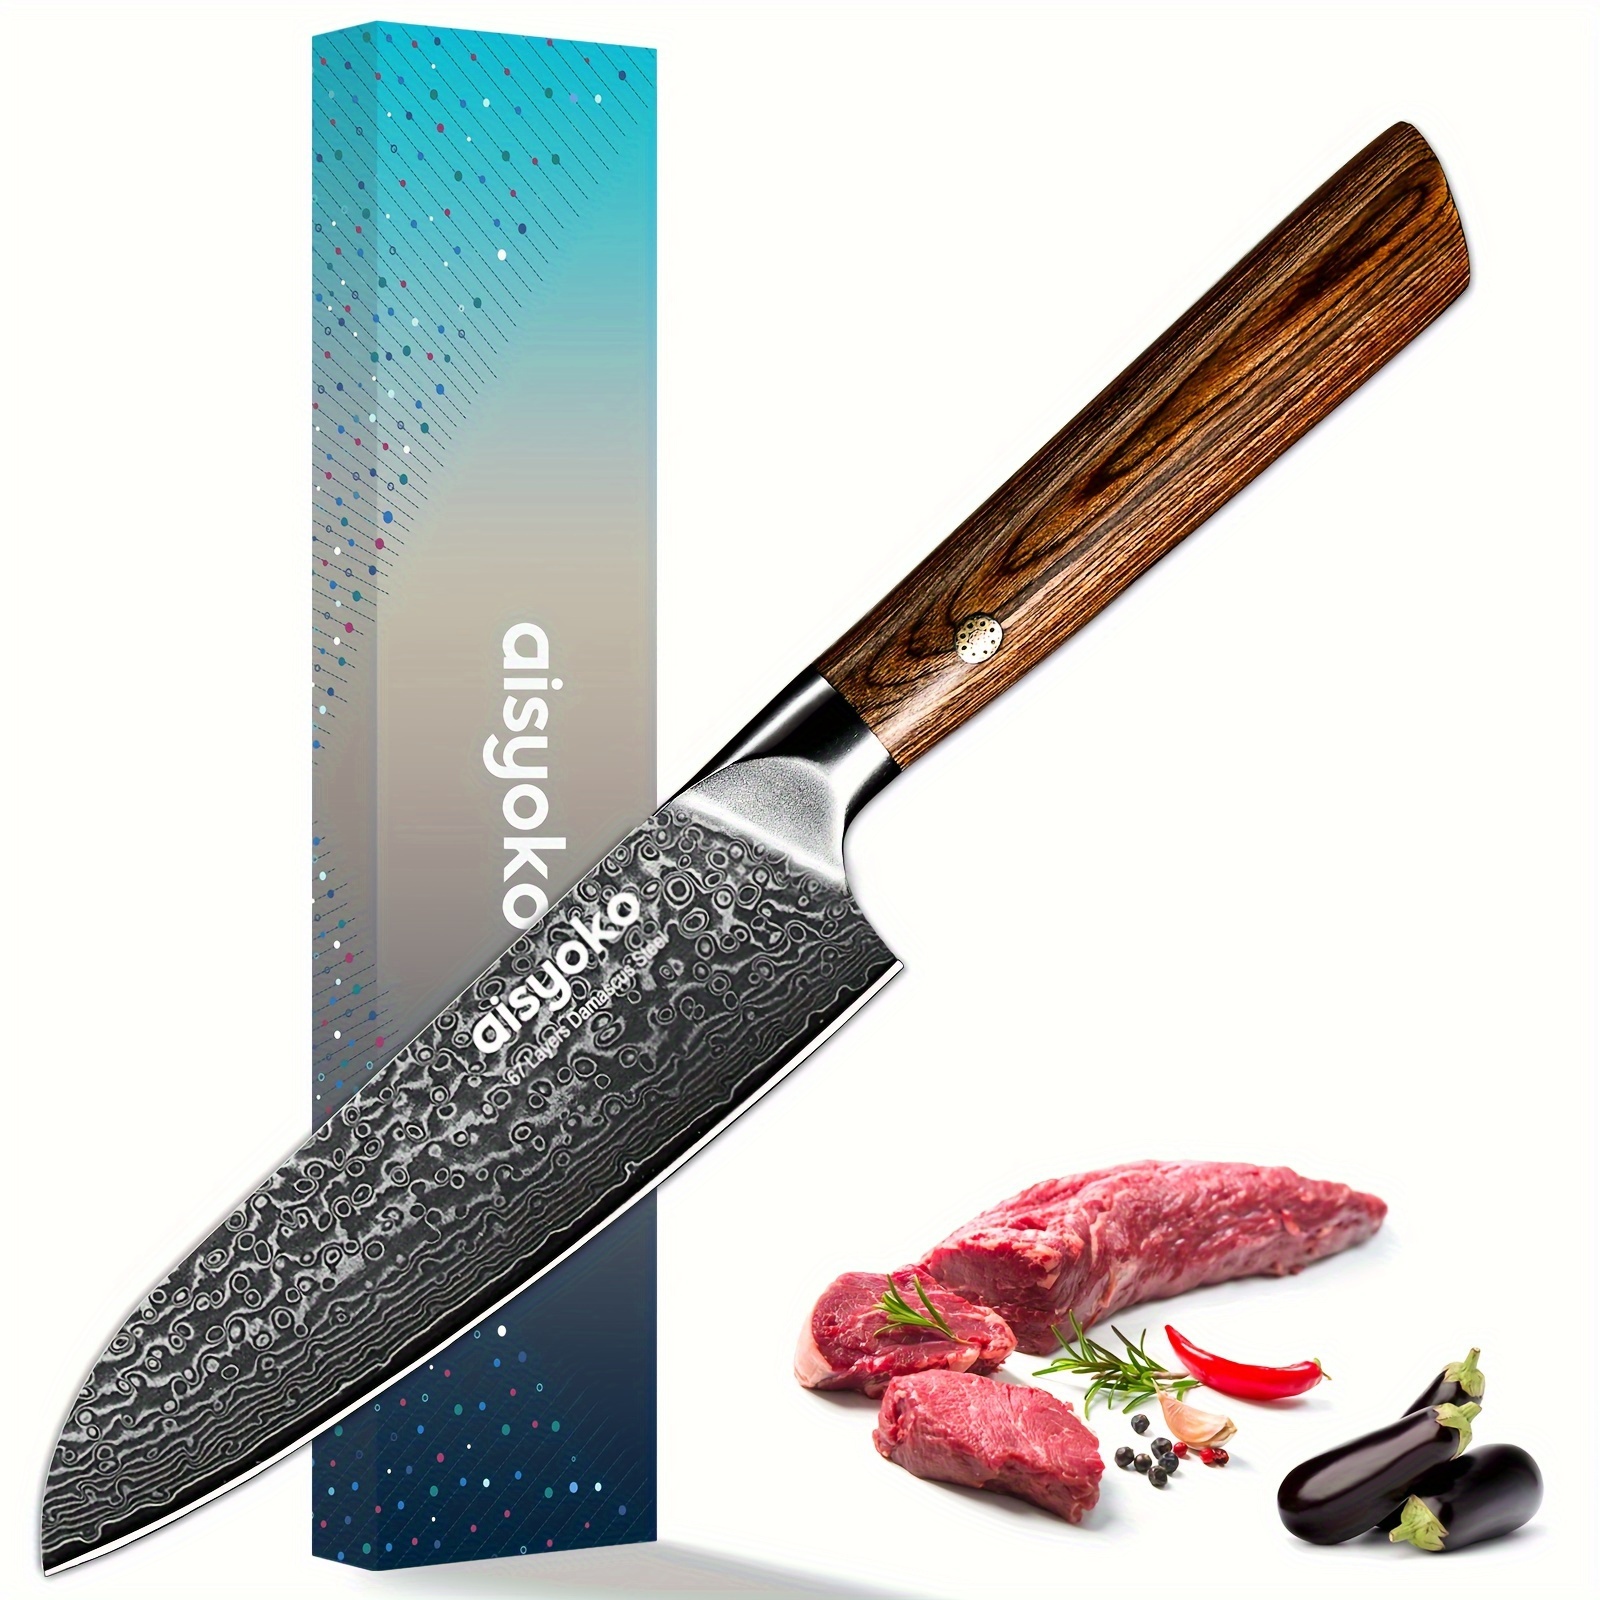 

1pc, Aisyoko Santoku Knife 5 Inches - Japan Vg-10 Super Steel 67 Layer Damascus Steel - Sharp Kitchen Knife - Luxury Gift Box With Colored Wooden Handle